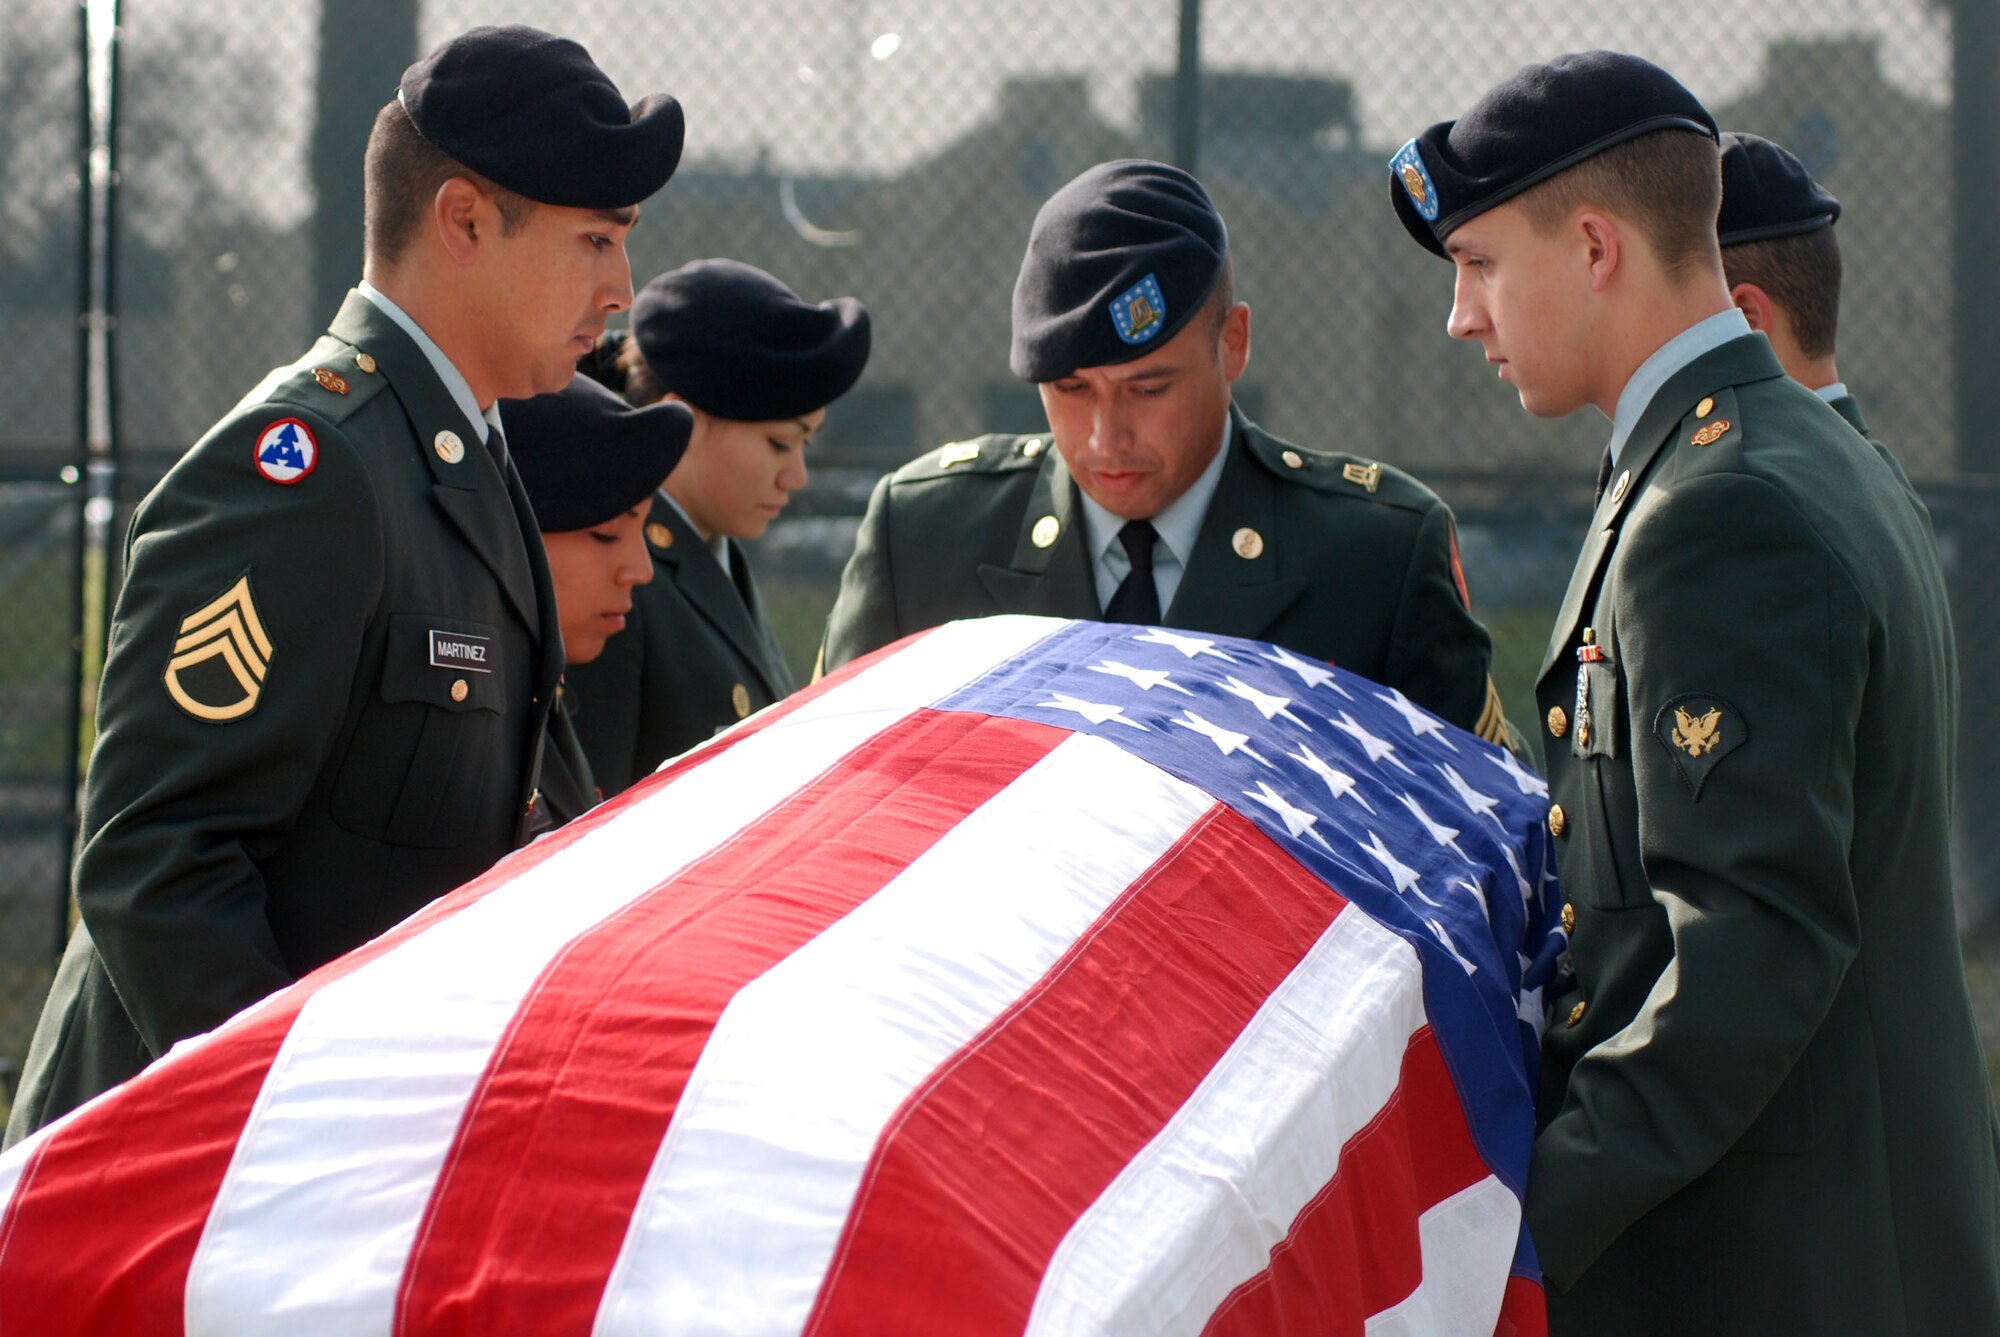 Members of an Army Reserve Honor Guard practice with the Blue Eagles Total Force Honor Guard at March Air Reserve Base, Calif., Feb. 12. The Honor Guard rehearsed a full funeral detail, including flag folding, pallbearing and a firing squad.  (U.S. Air Force photo/Staff Sgt. Megan Crusher)